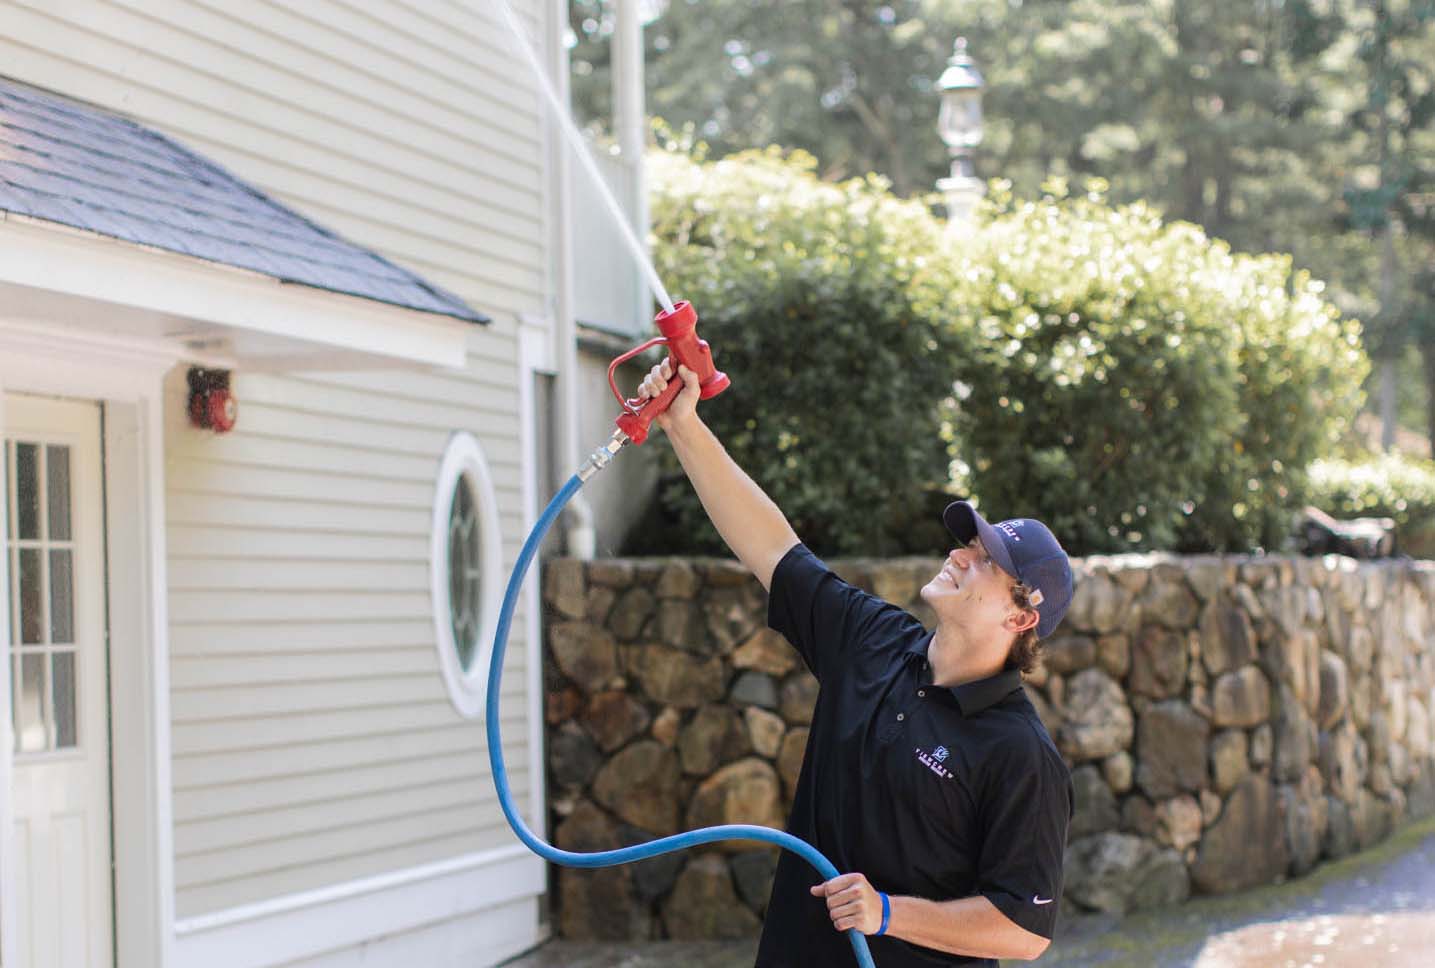 Roof Safety and Cleaning Efficiency